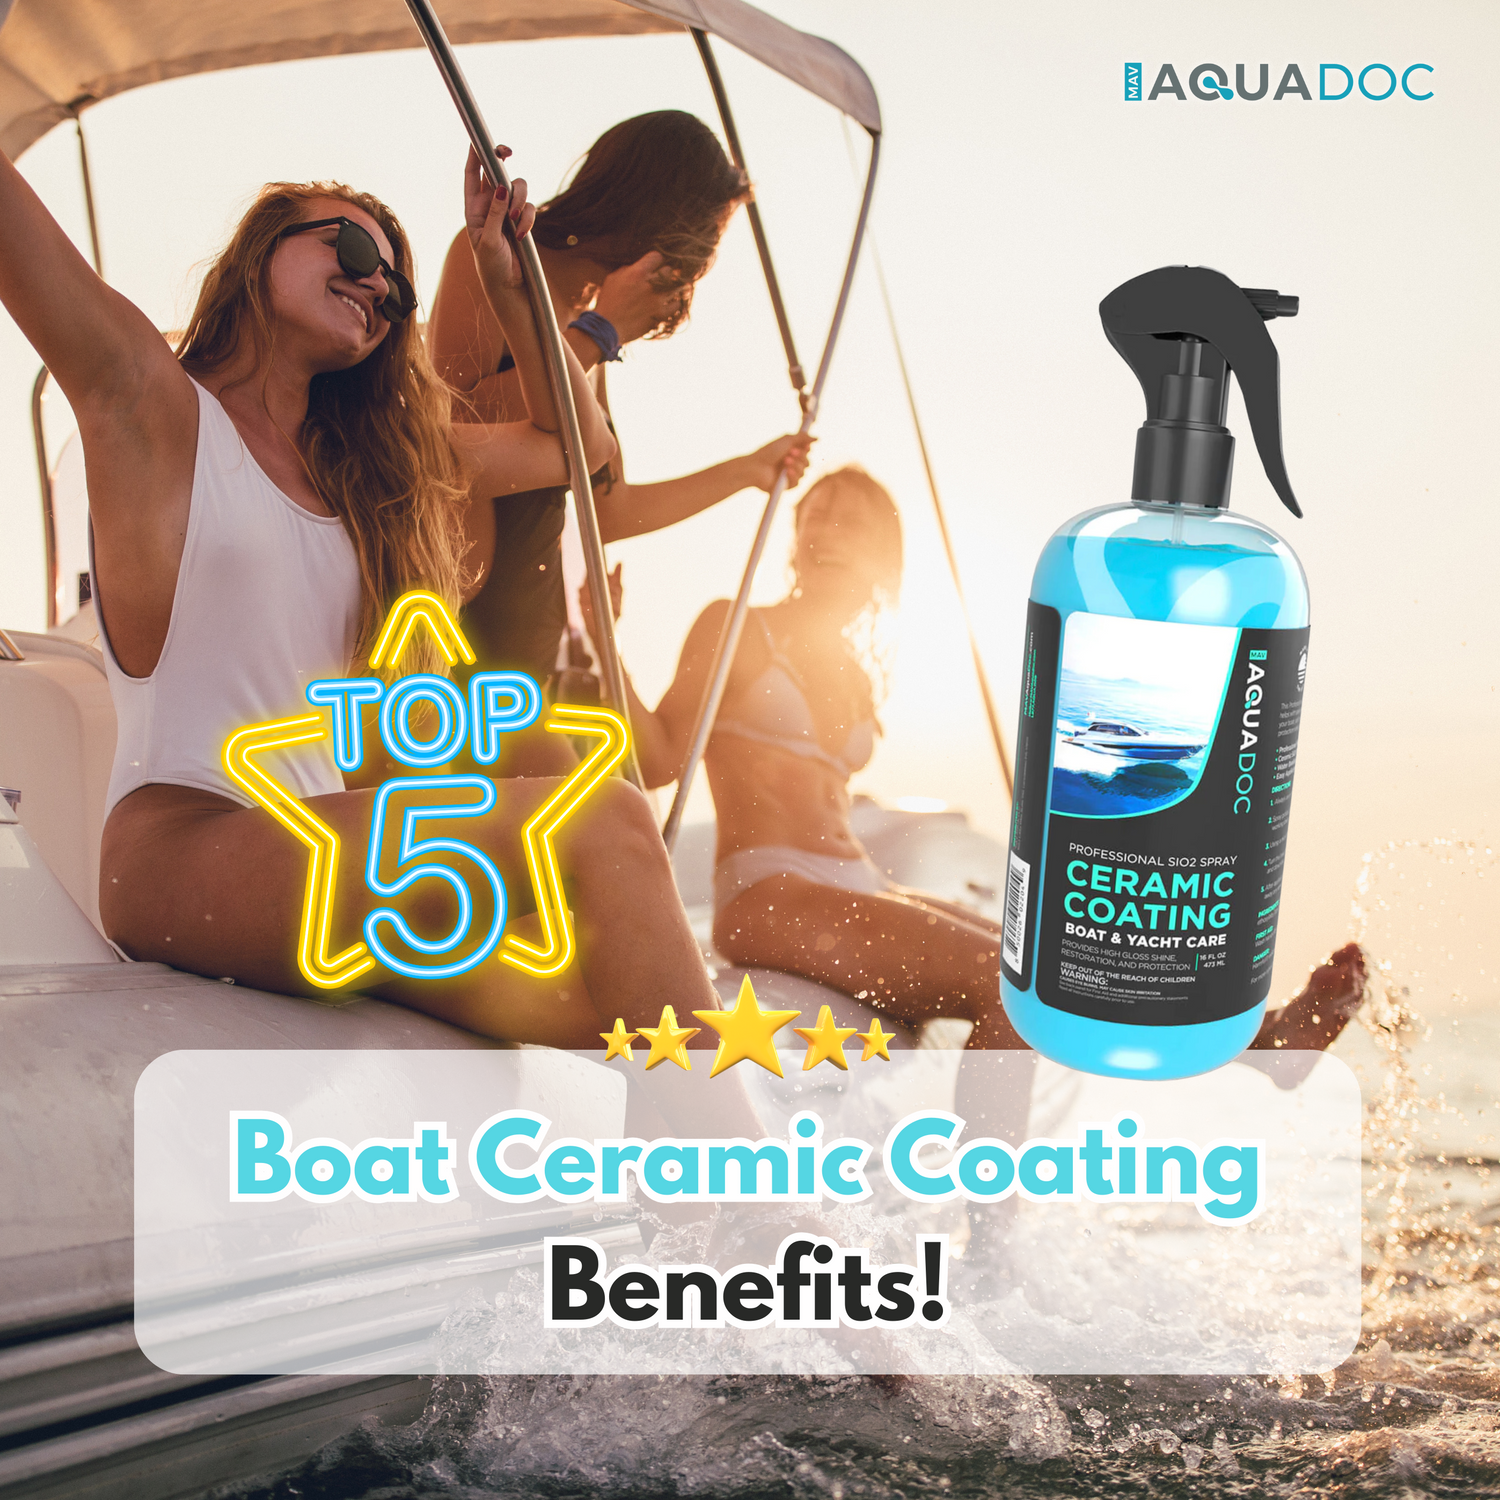 top 5 benefits of boat ceramic coating that will have you ditching the wax and investing in brilliance